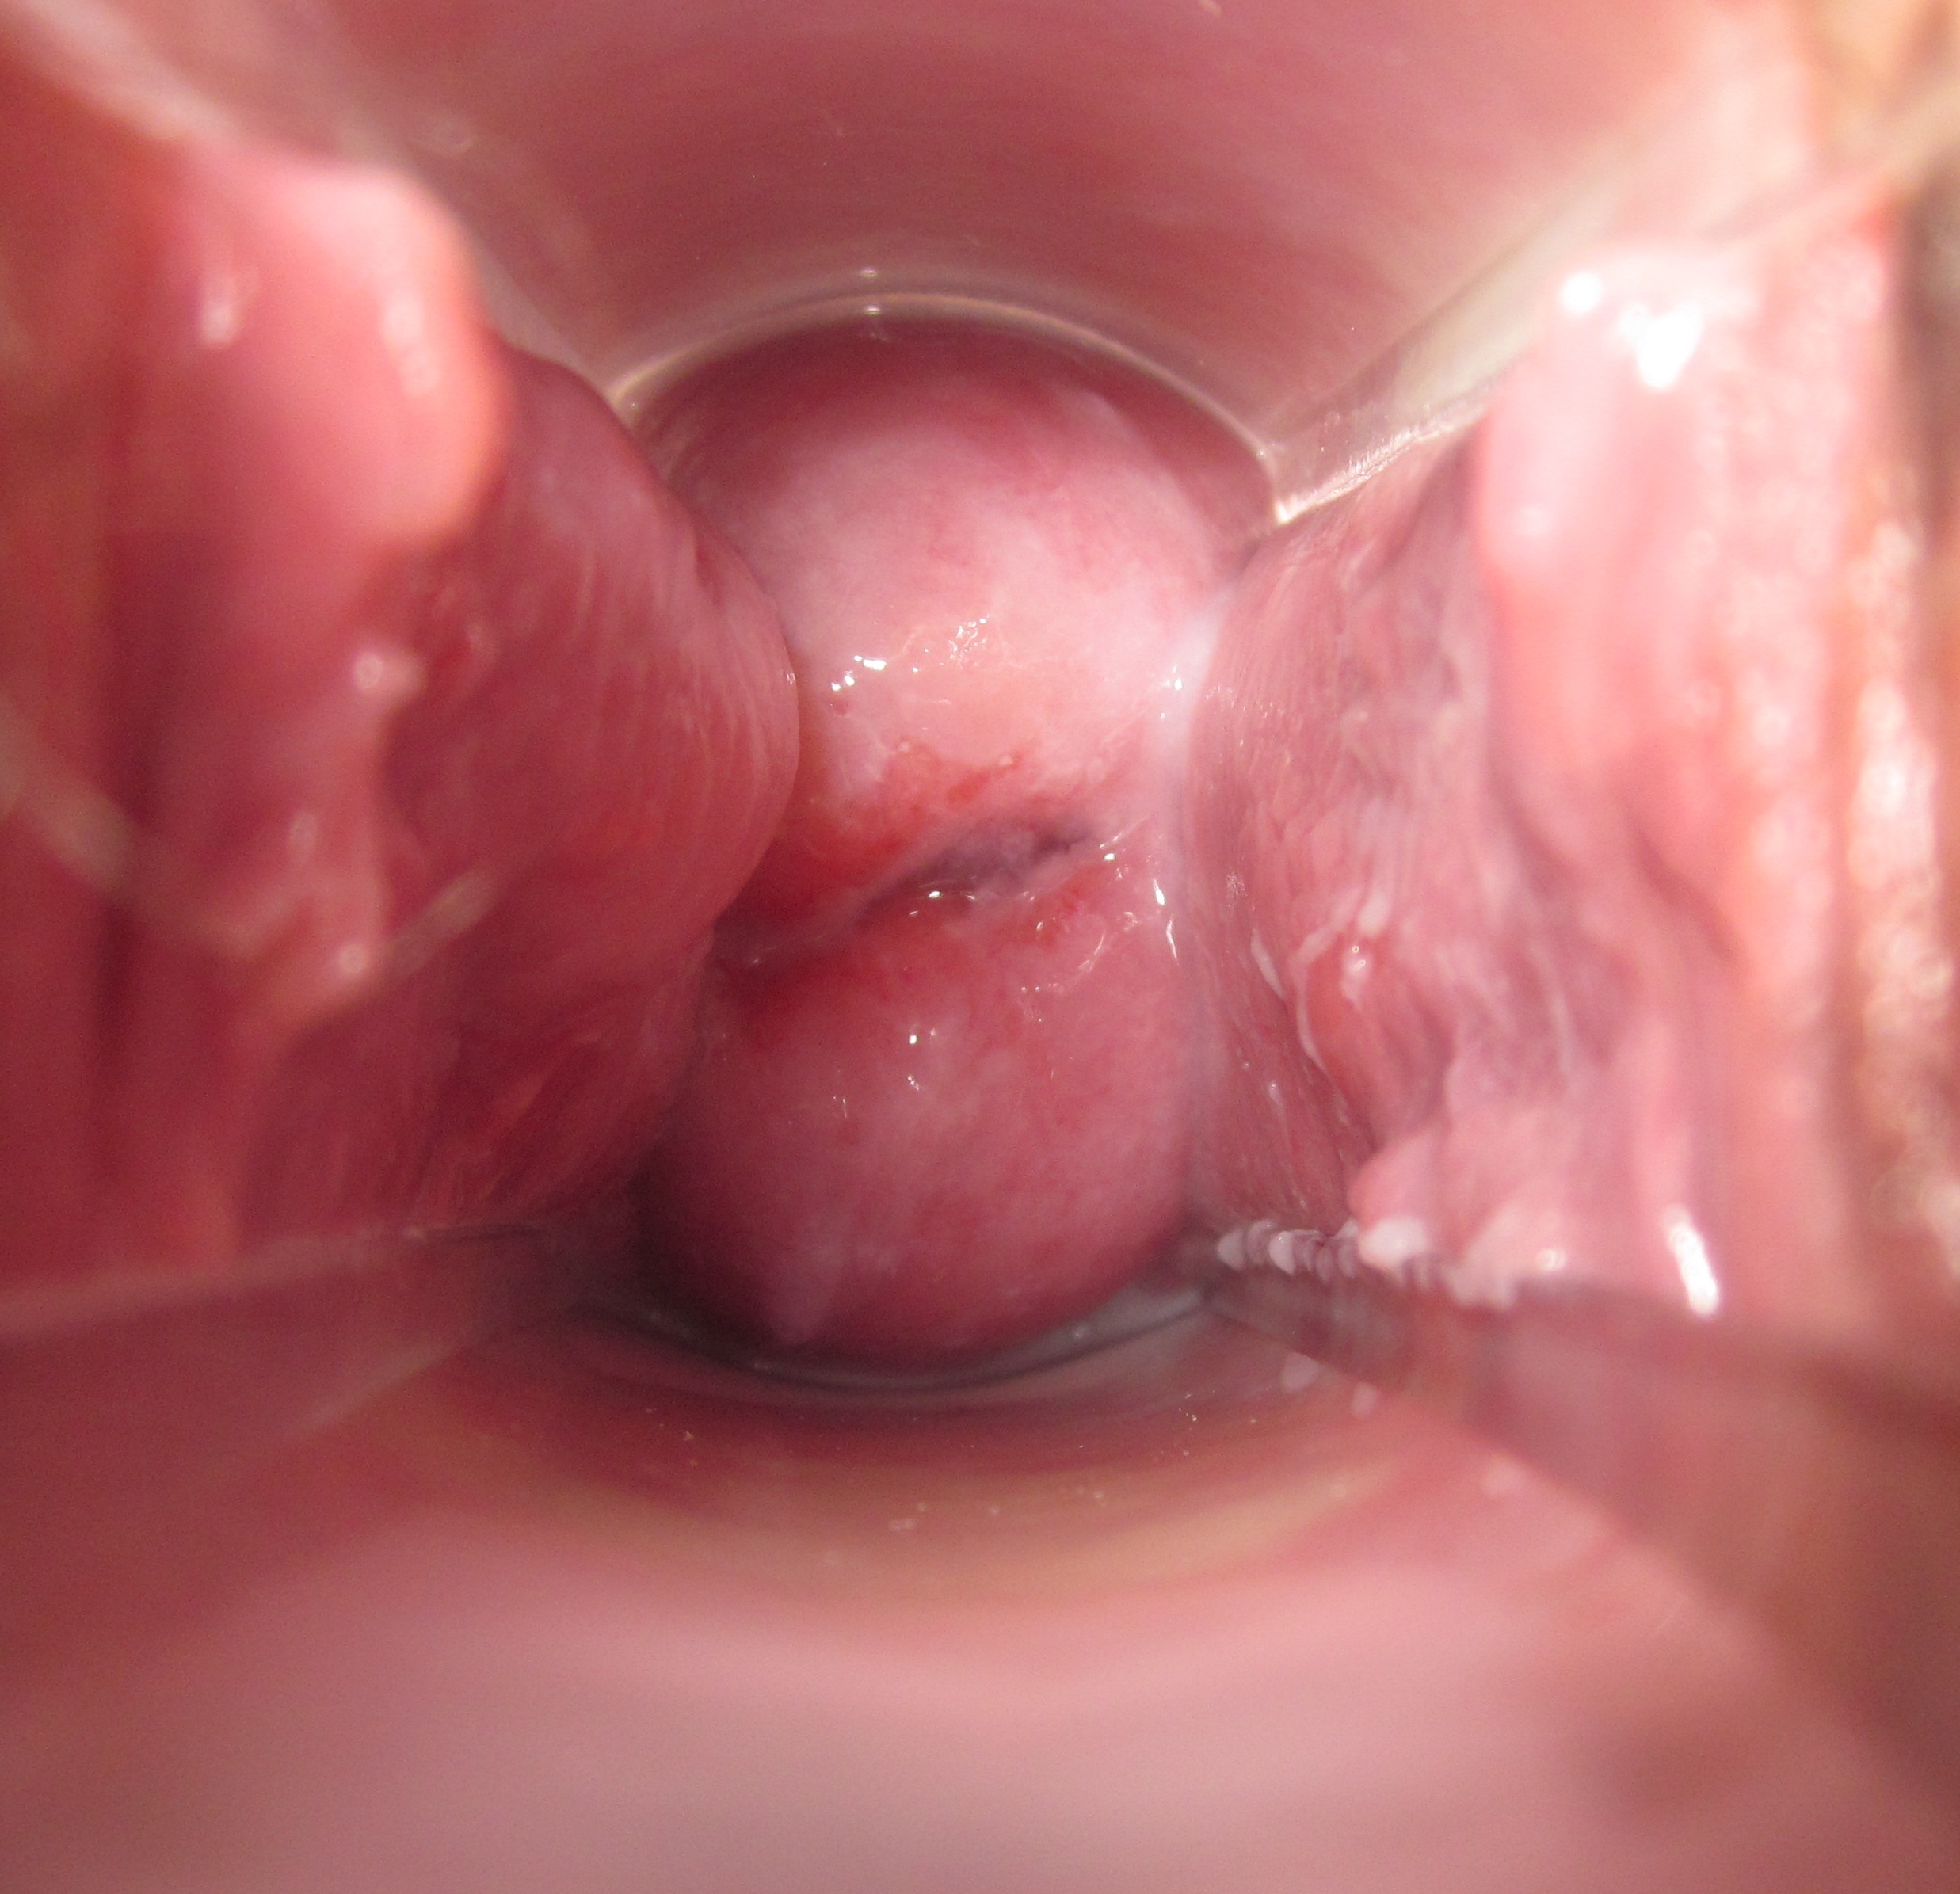 Picture Of Beautiful Vagina Image 170785